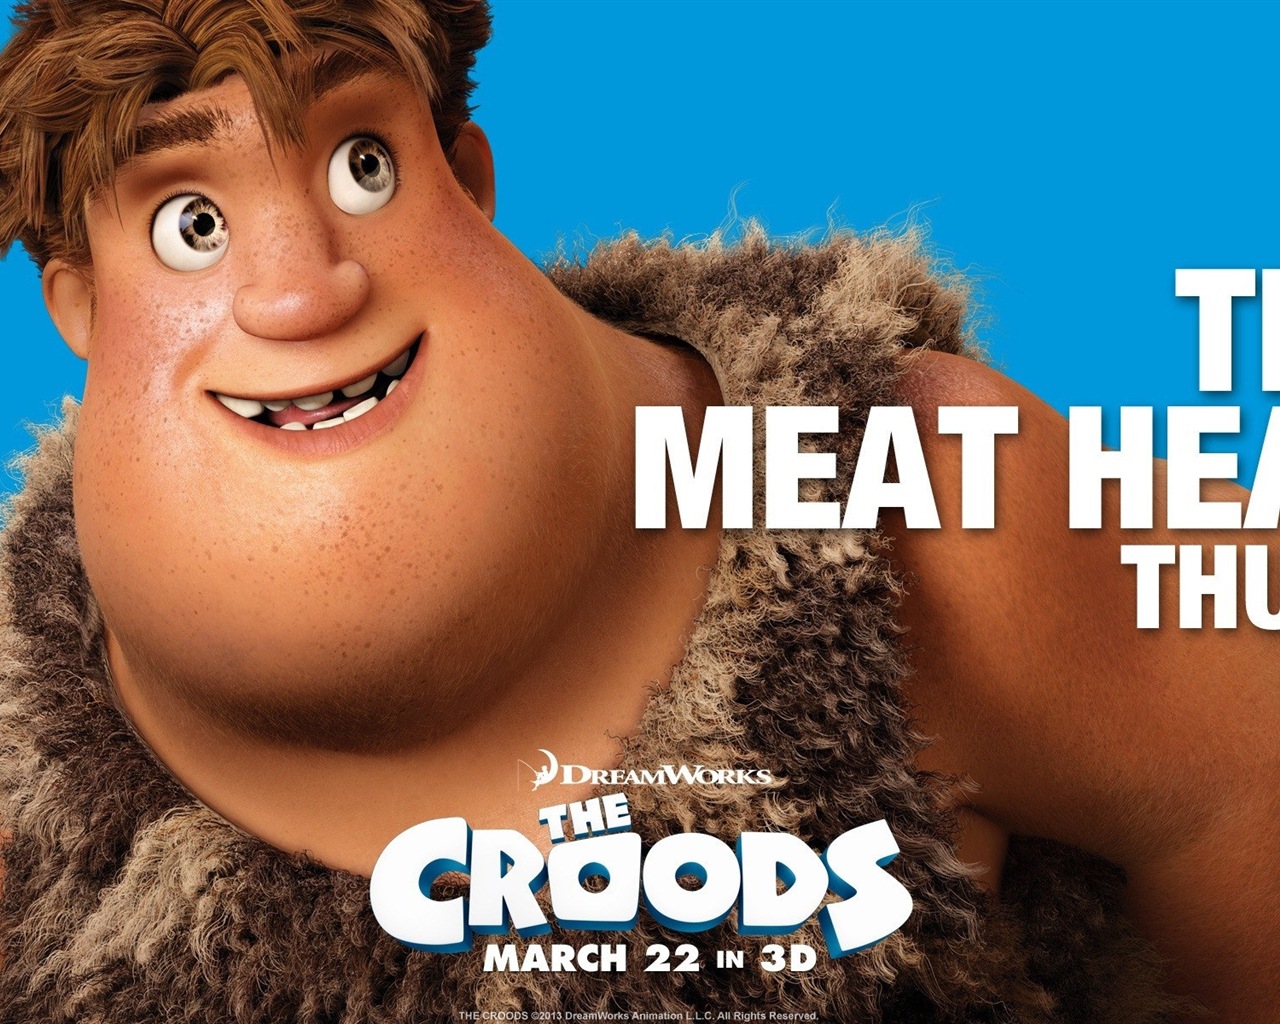 V Croods HD Movie Wallpapers #13 - 1280x1024